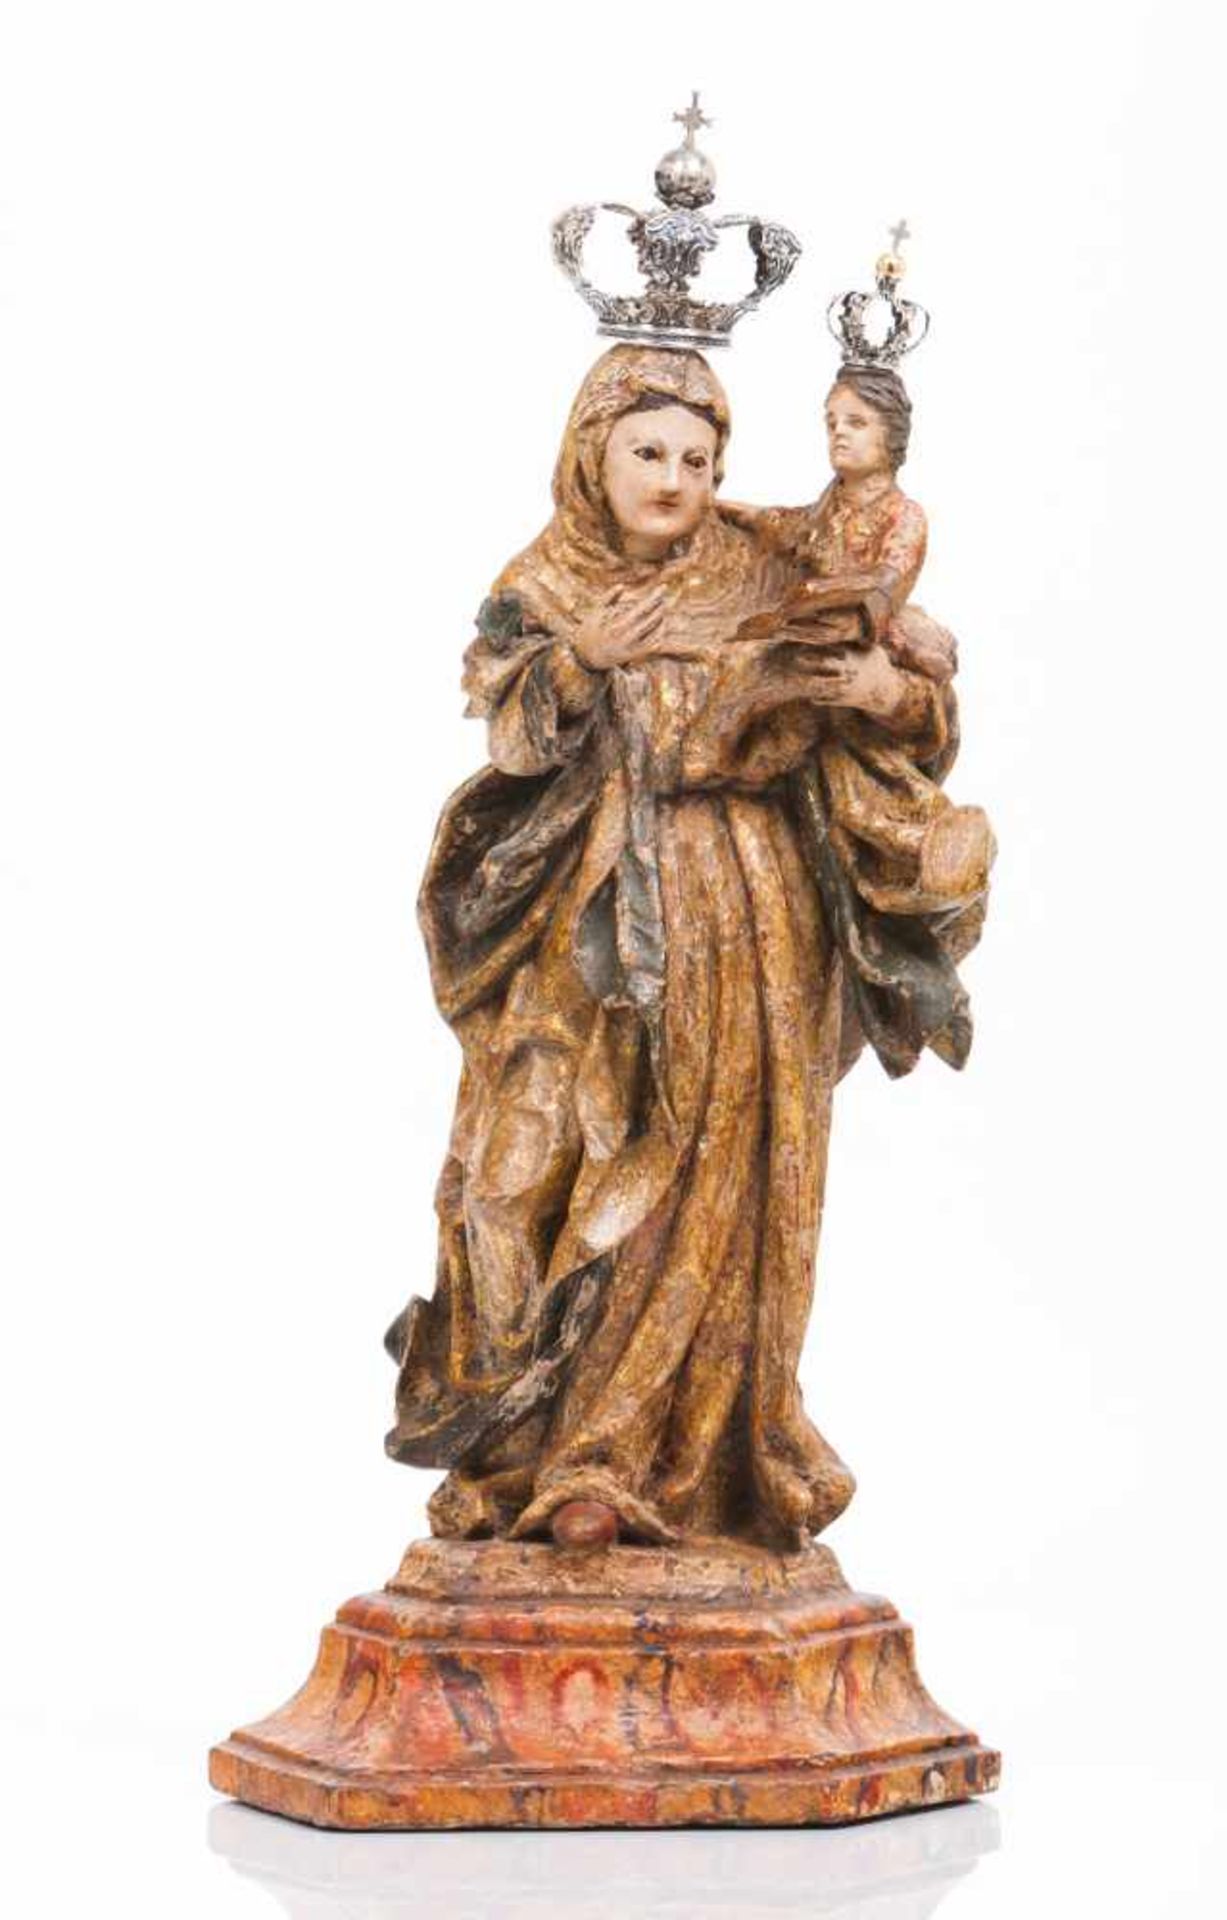 Saint AnneCarved, gilt and polychrome wooden sculptureDepicting Saint Anne teaching the Virgin how